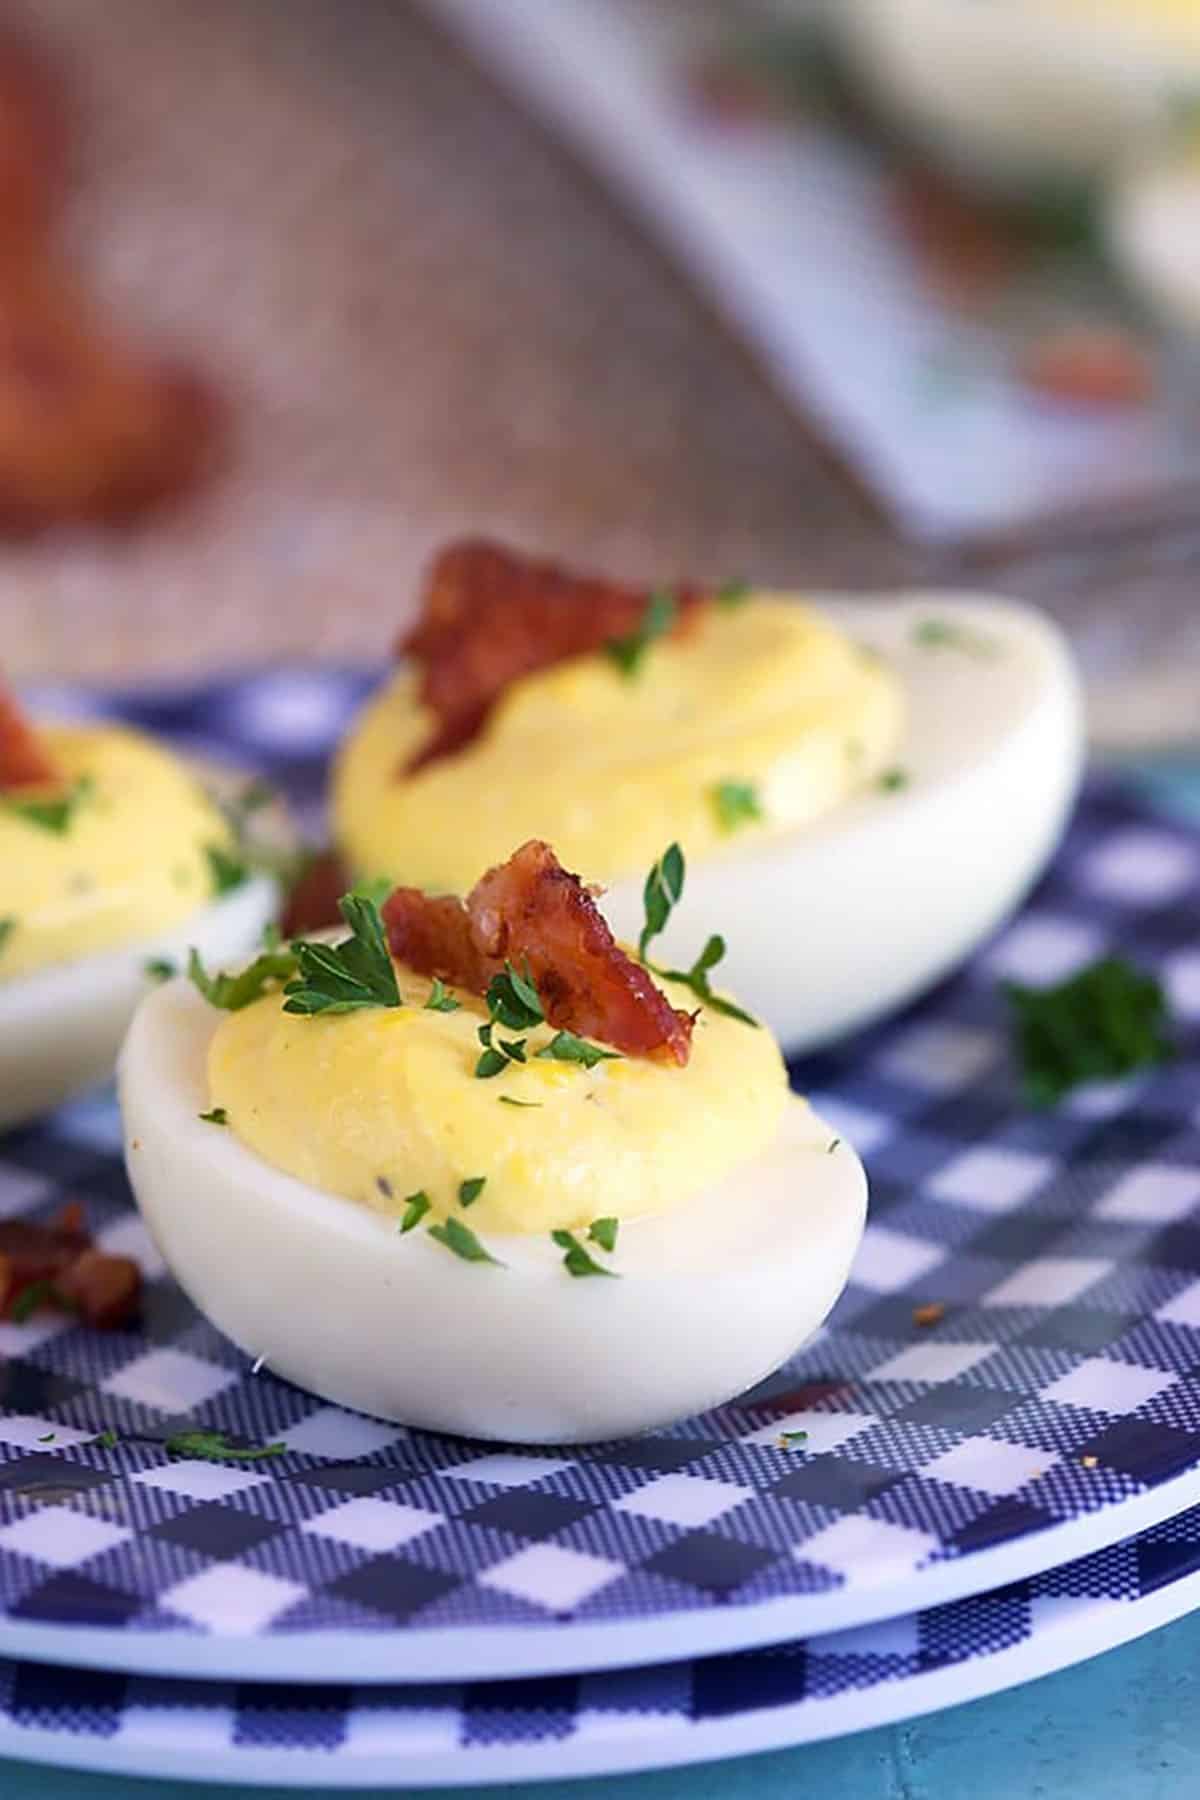 Creamy deviled eggs on a blue and white gingham plate with a slice of bacon on top.